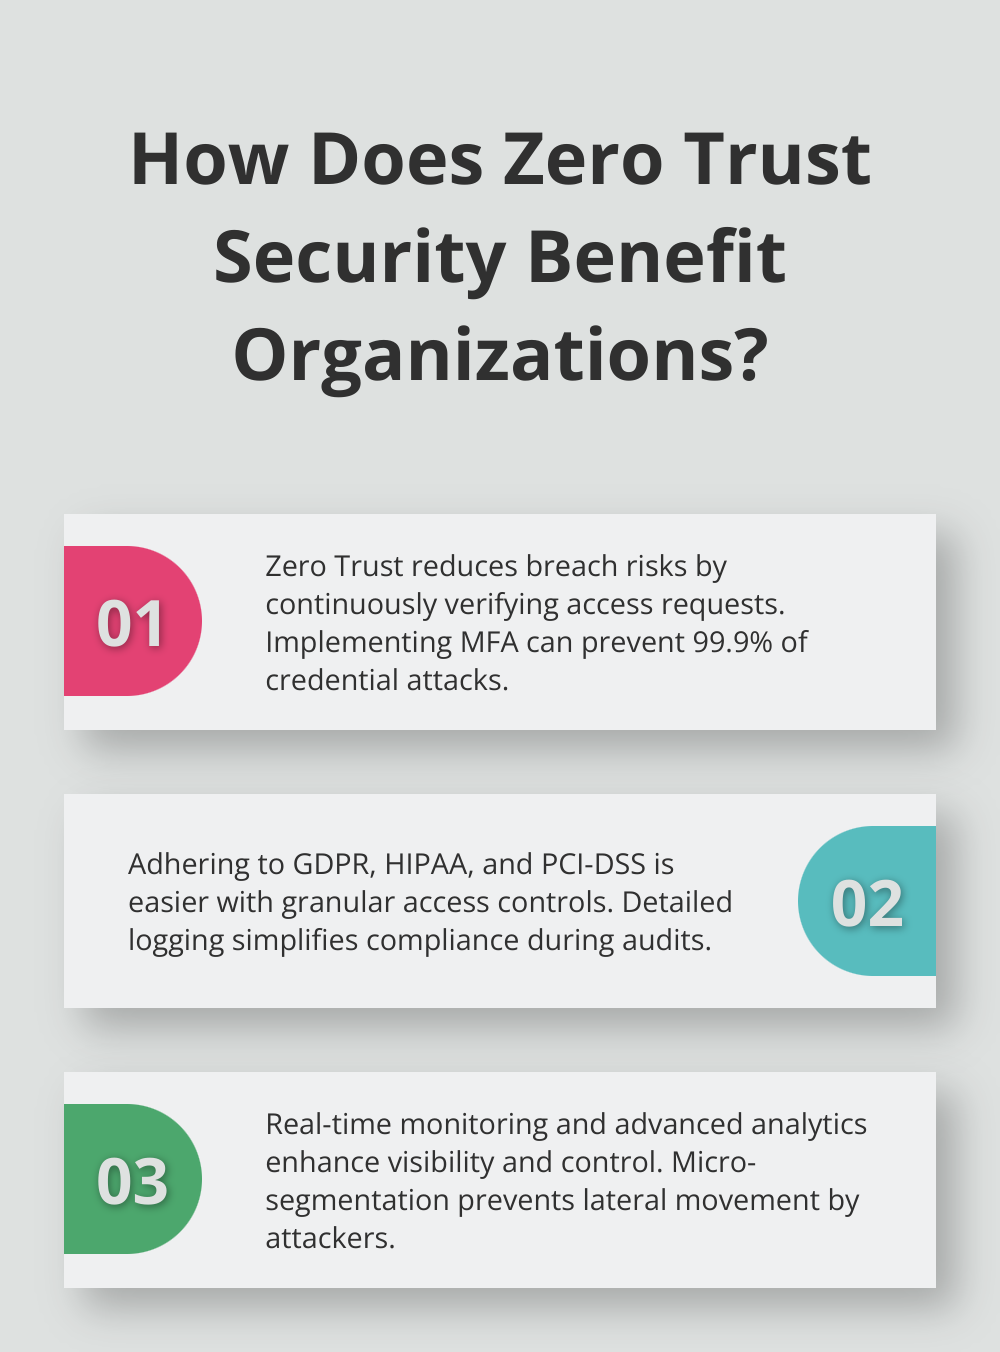 Fact - How Does Zero Trust Security Benefit Organizations?